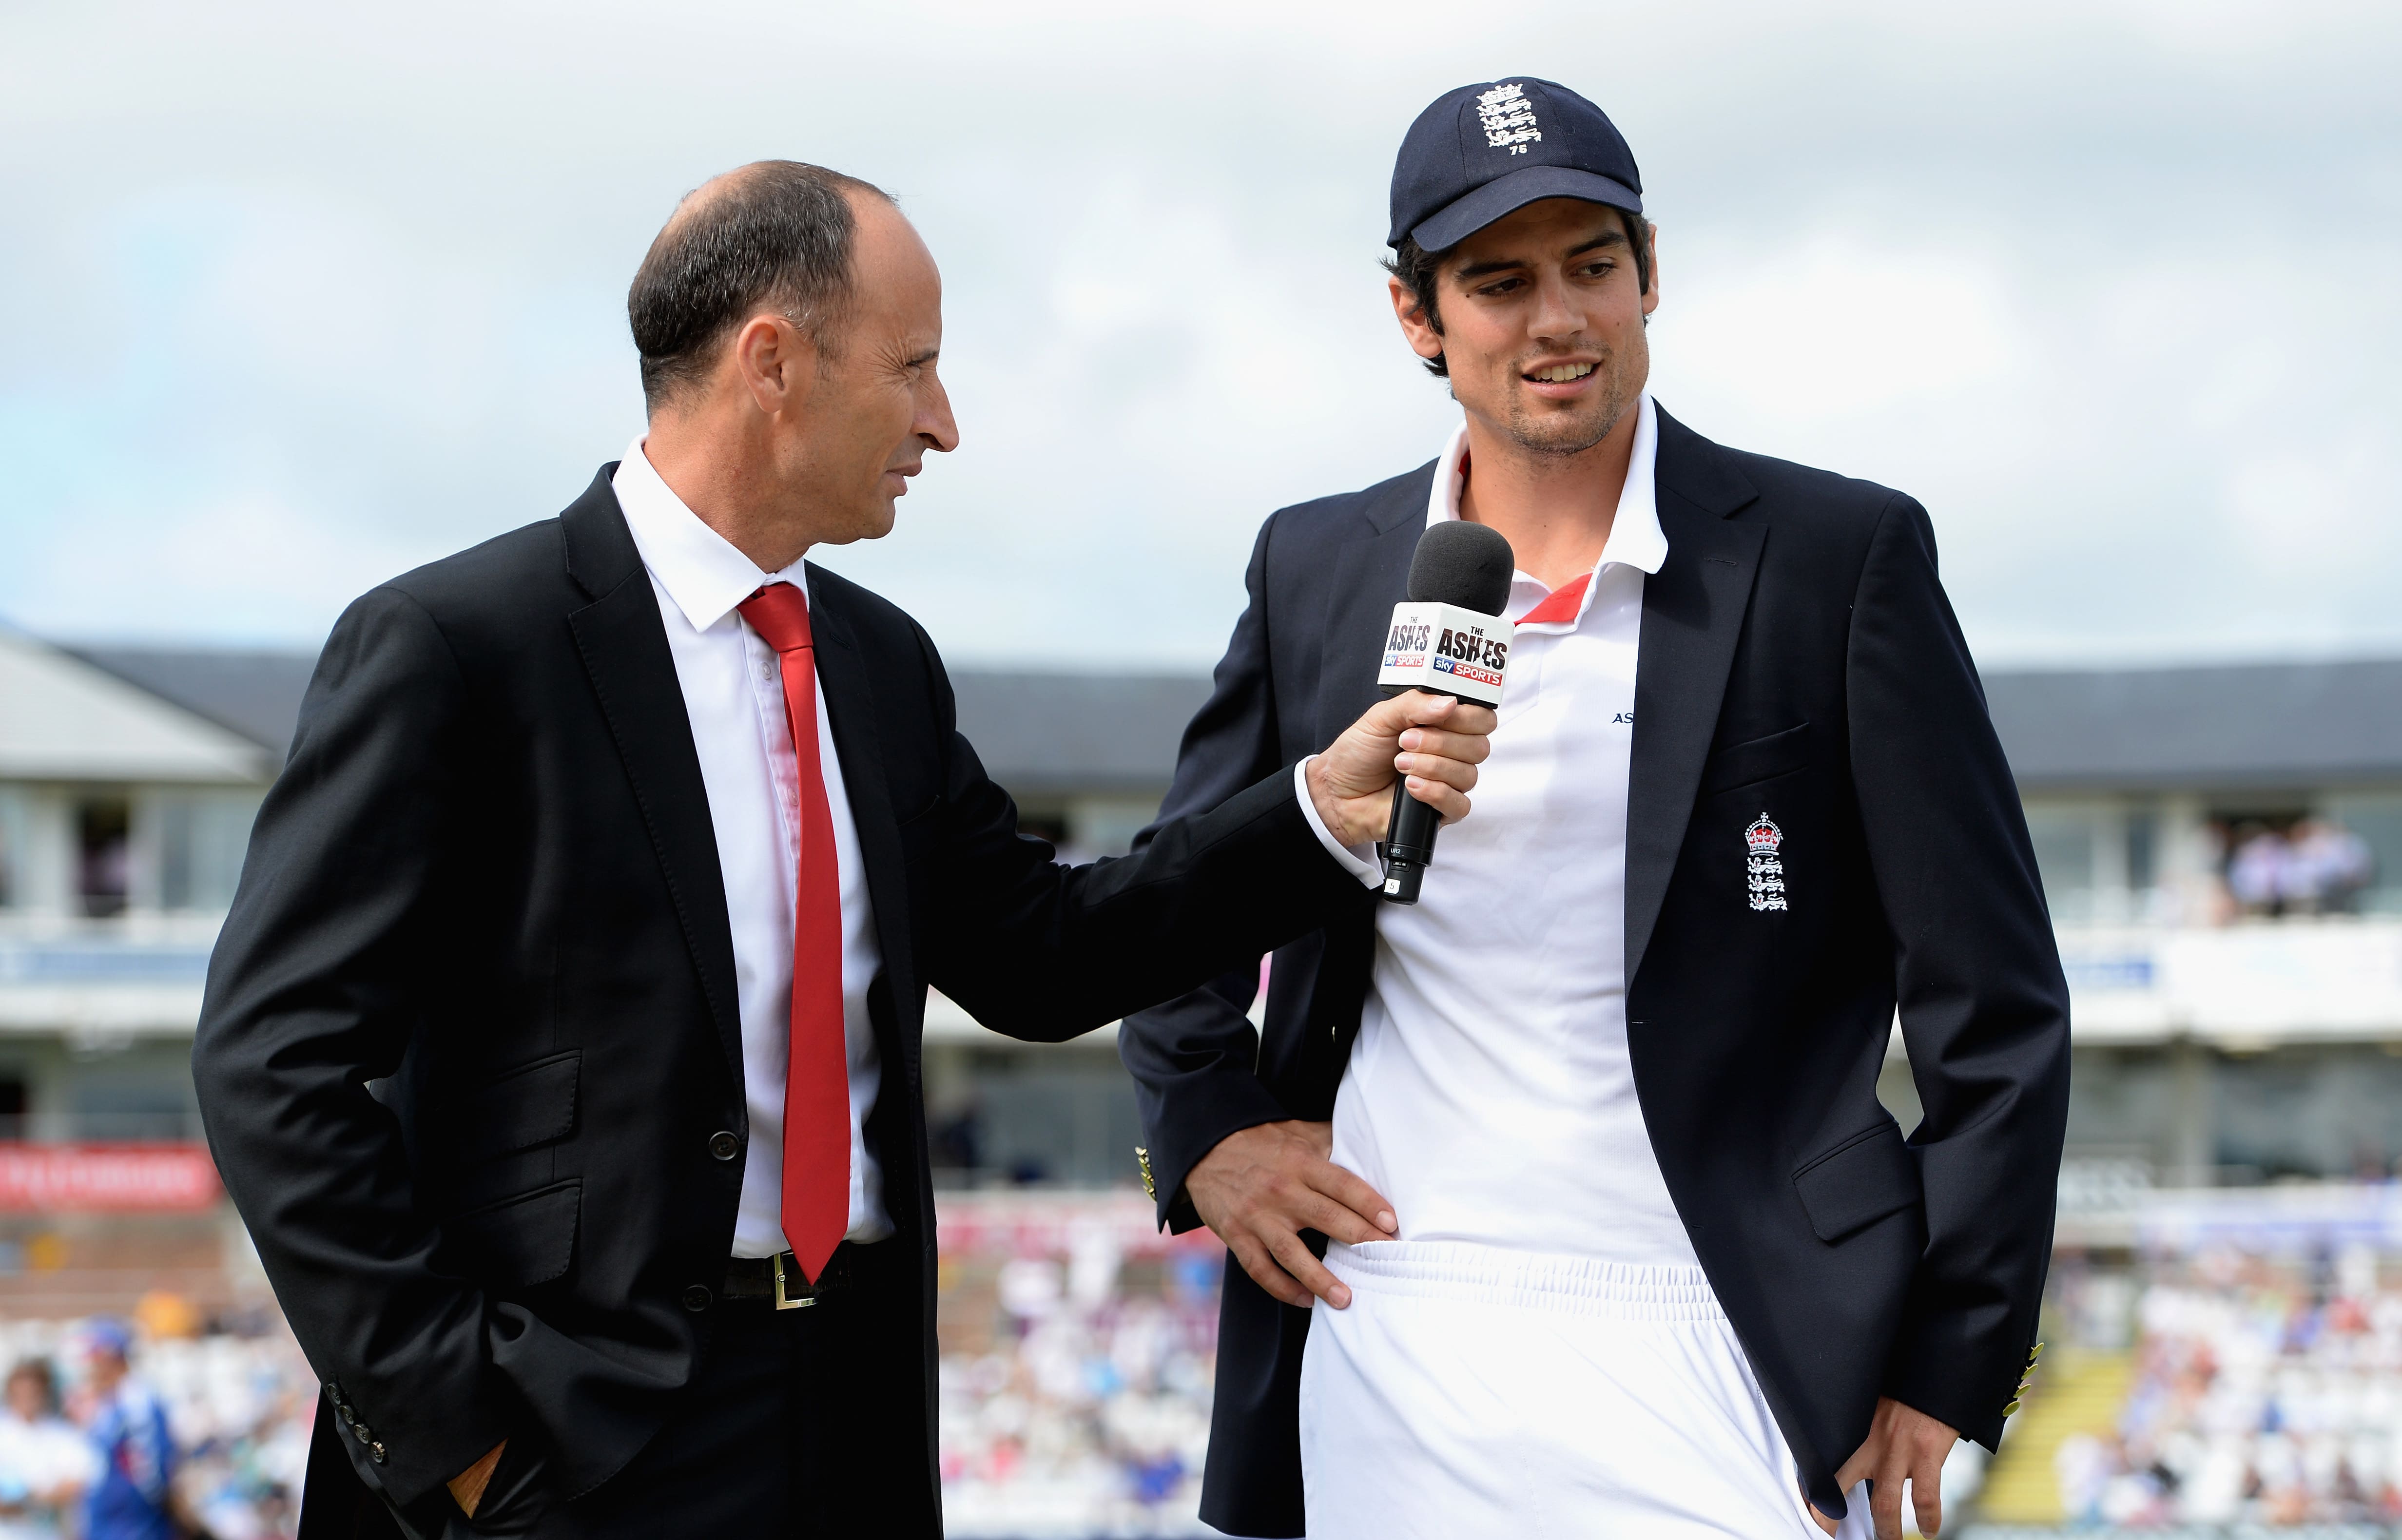 Ashes 2013: Graeme Swann interrupts Alastair Cook’s press conference